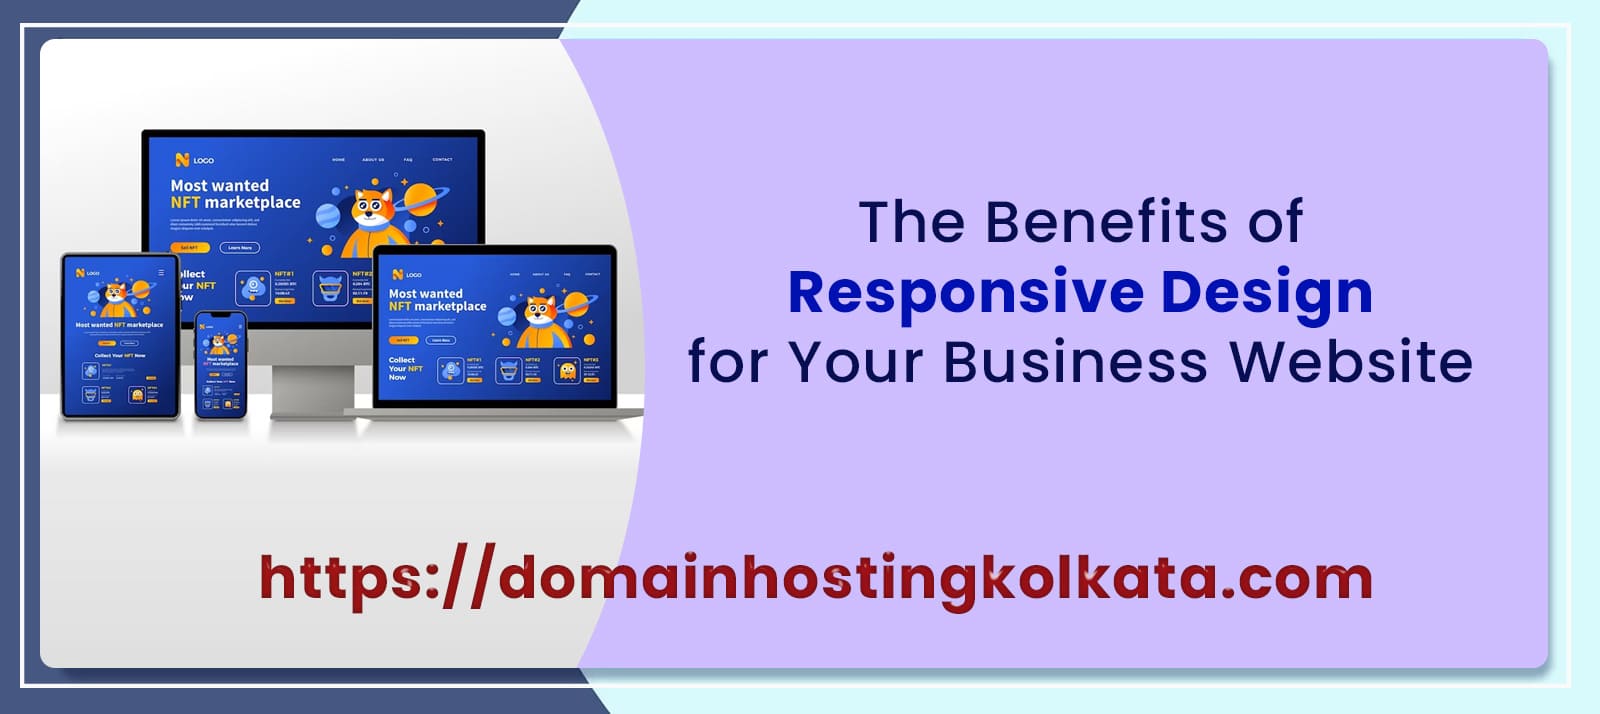 The Benefits of Responsive Design for Your Business Website